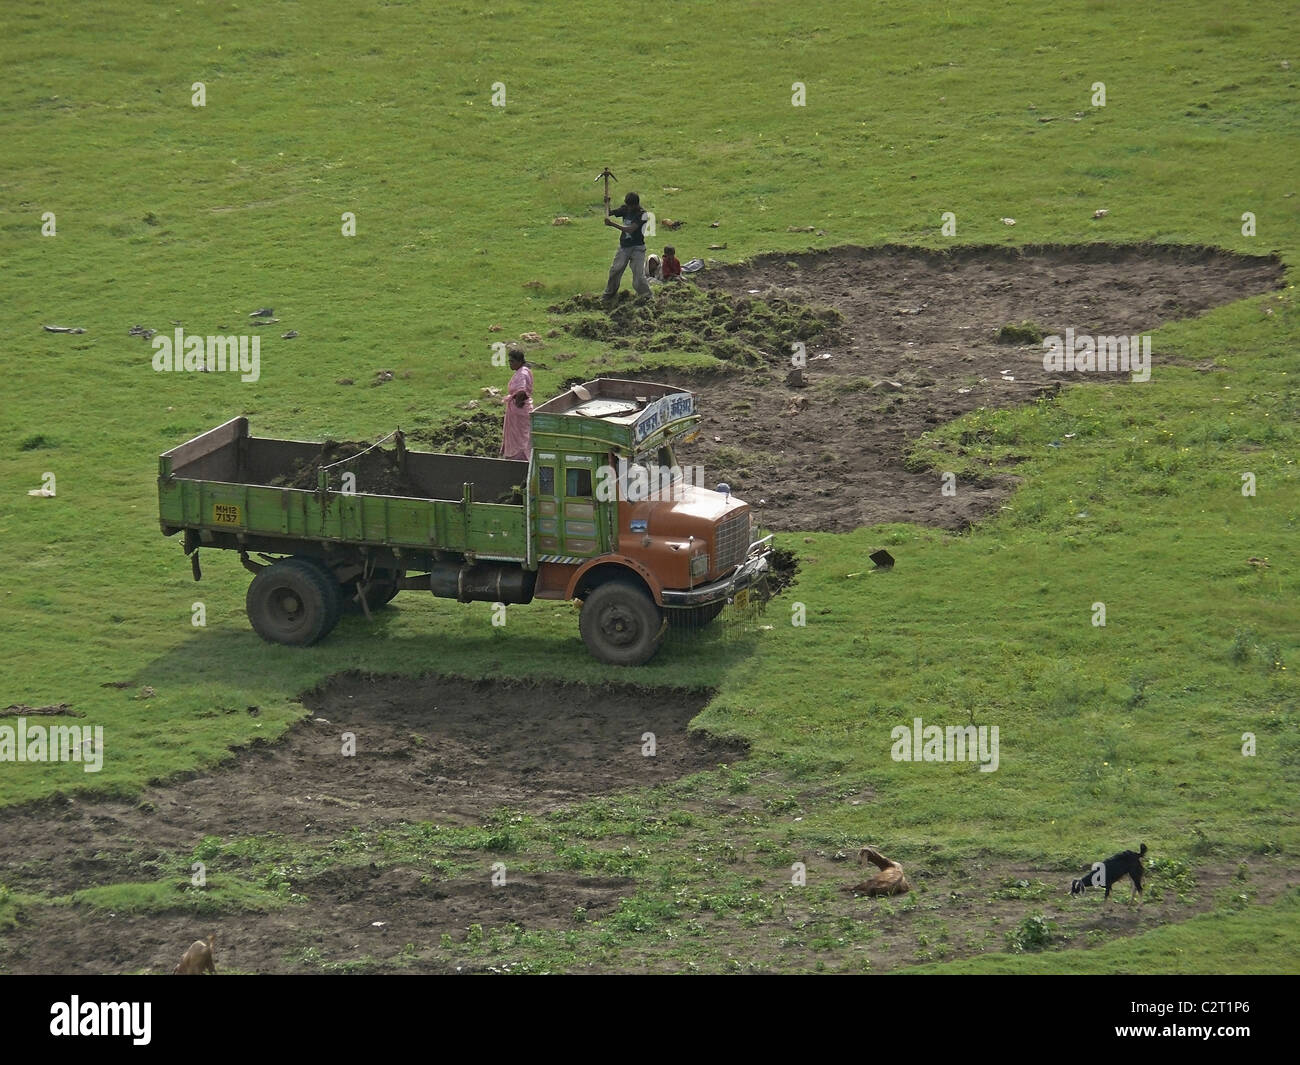 Workers are Uploading Soil in a lorry, India Stock Photo